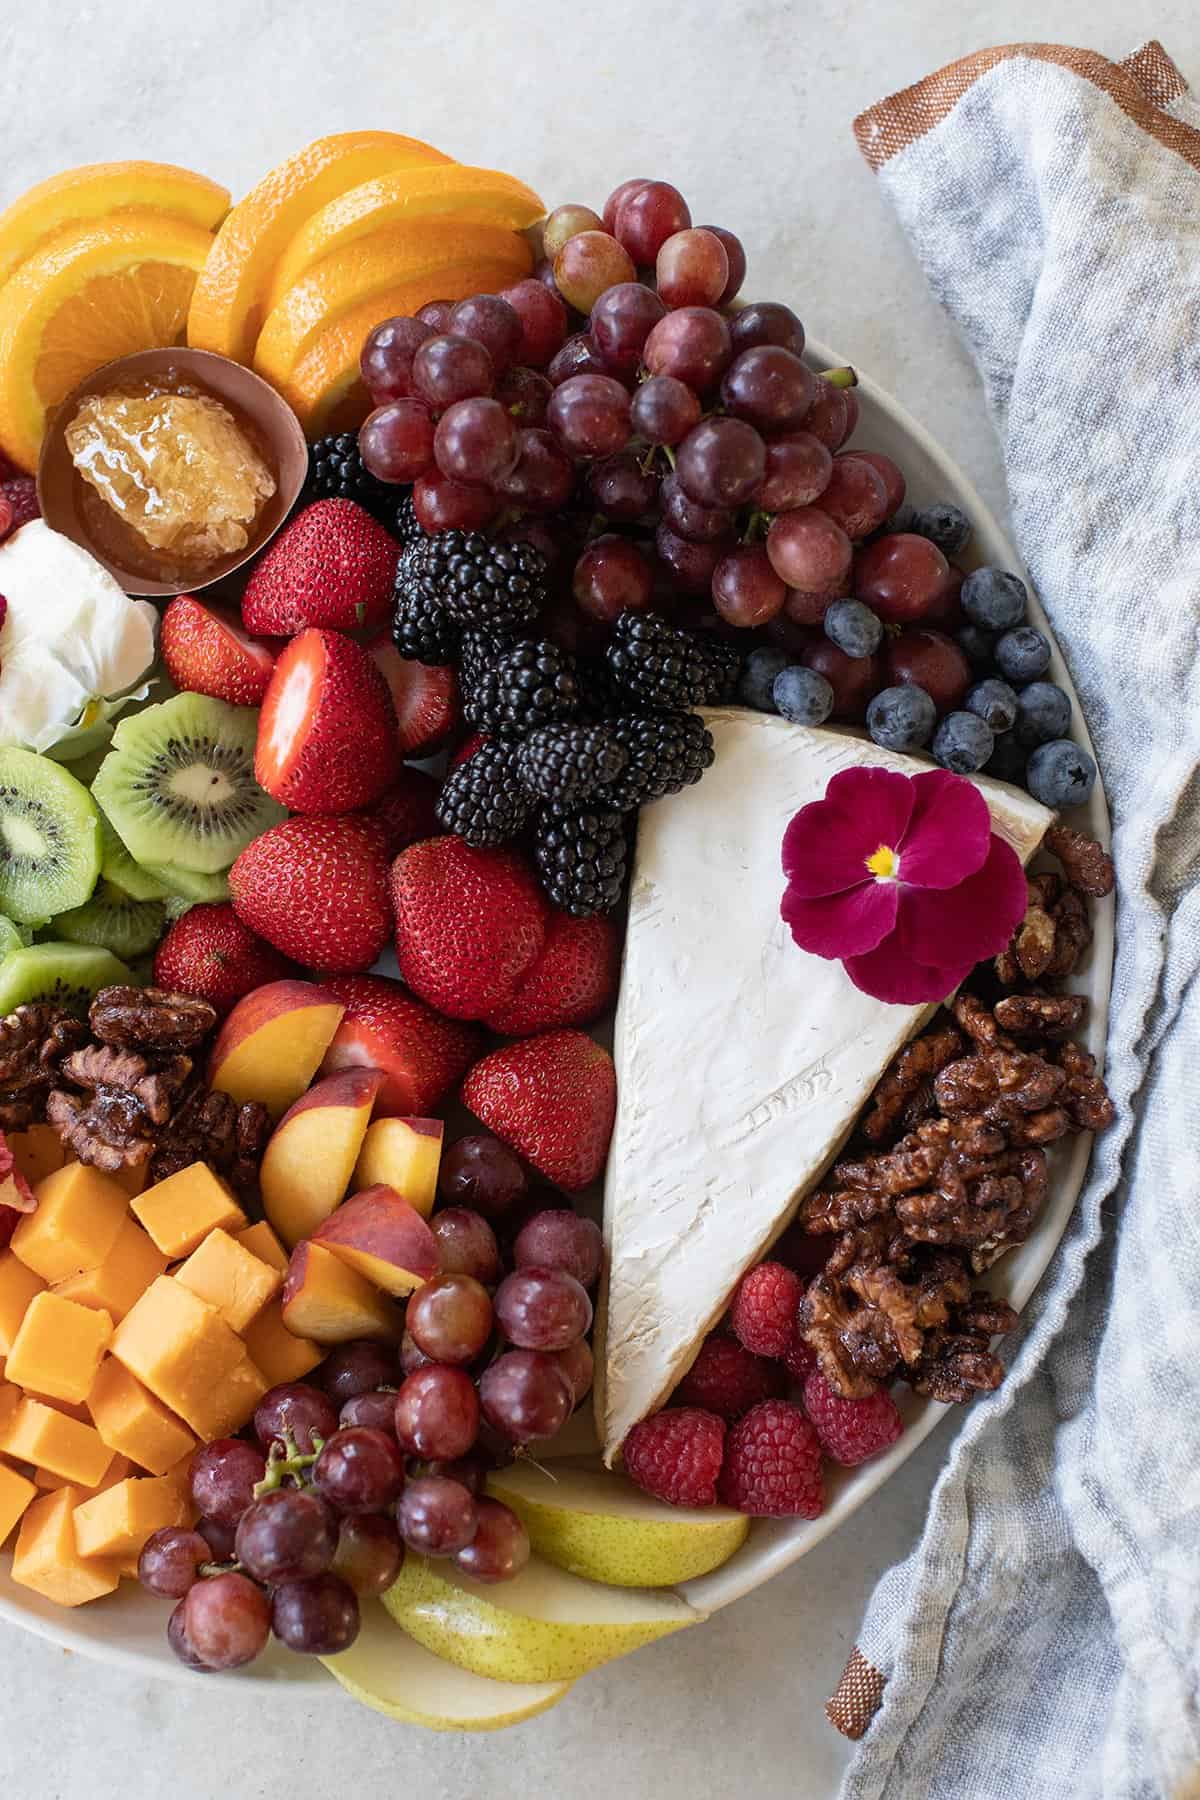 Brie cheese with candied walnuts, grapes, pears, raspberries and sliced kiwis.